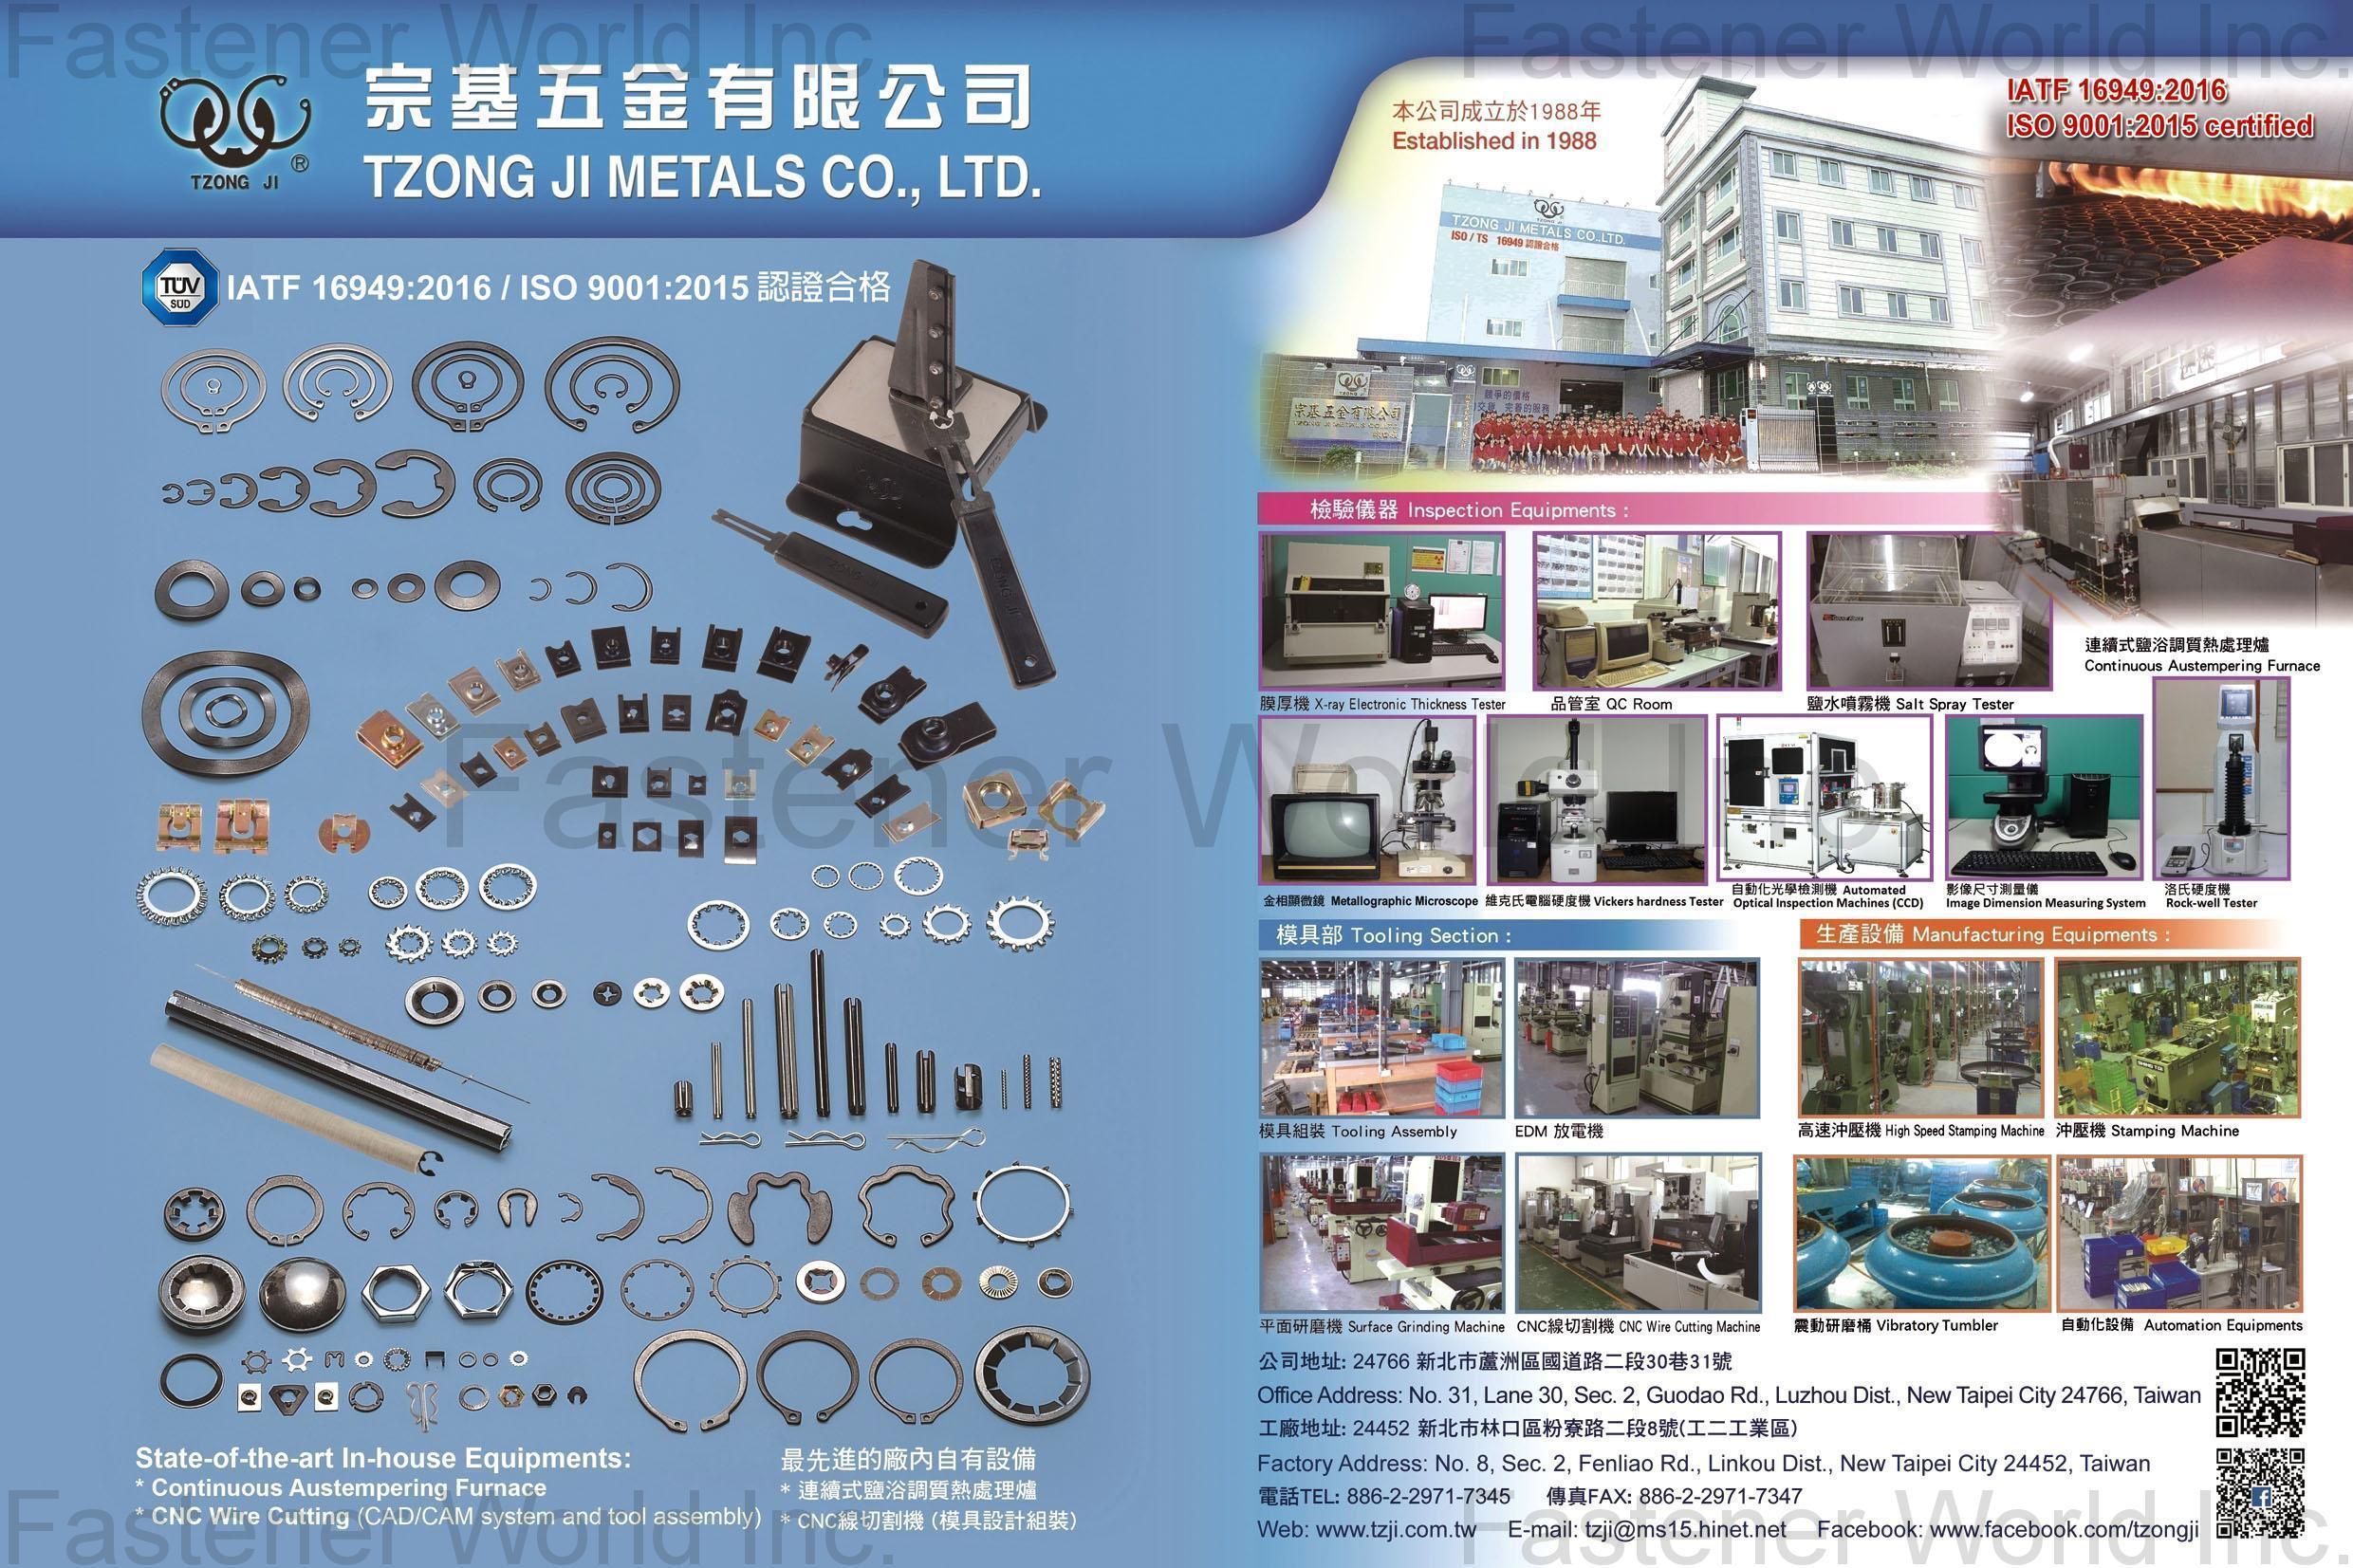 TZONG JI METALS CO., LTD. , Curved Washers, Spring Pins, Rolled Pins, Retaining Rings, Tooth Lock Washers, E-Rings , Washers